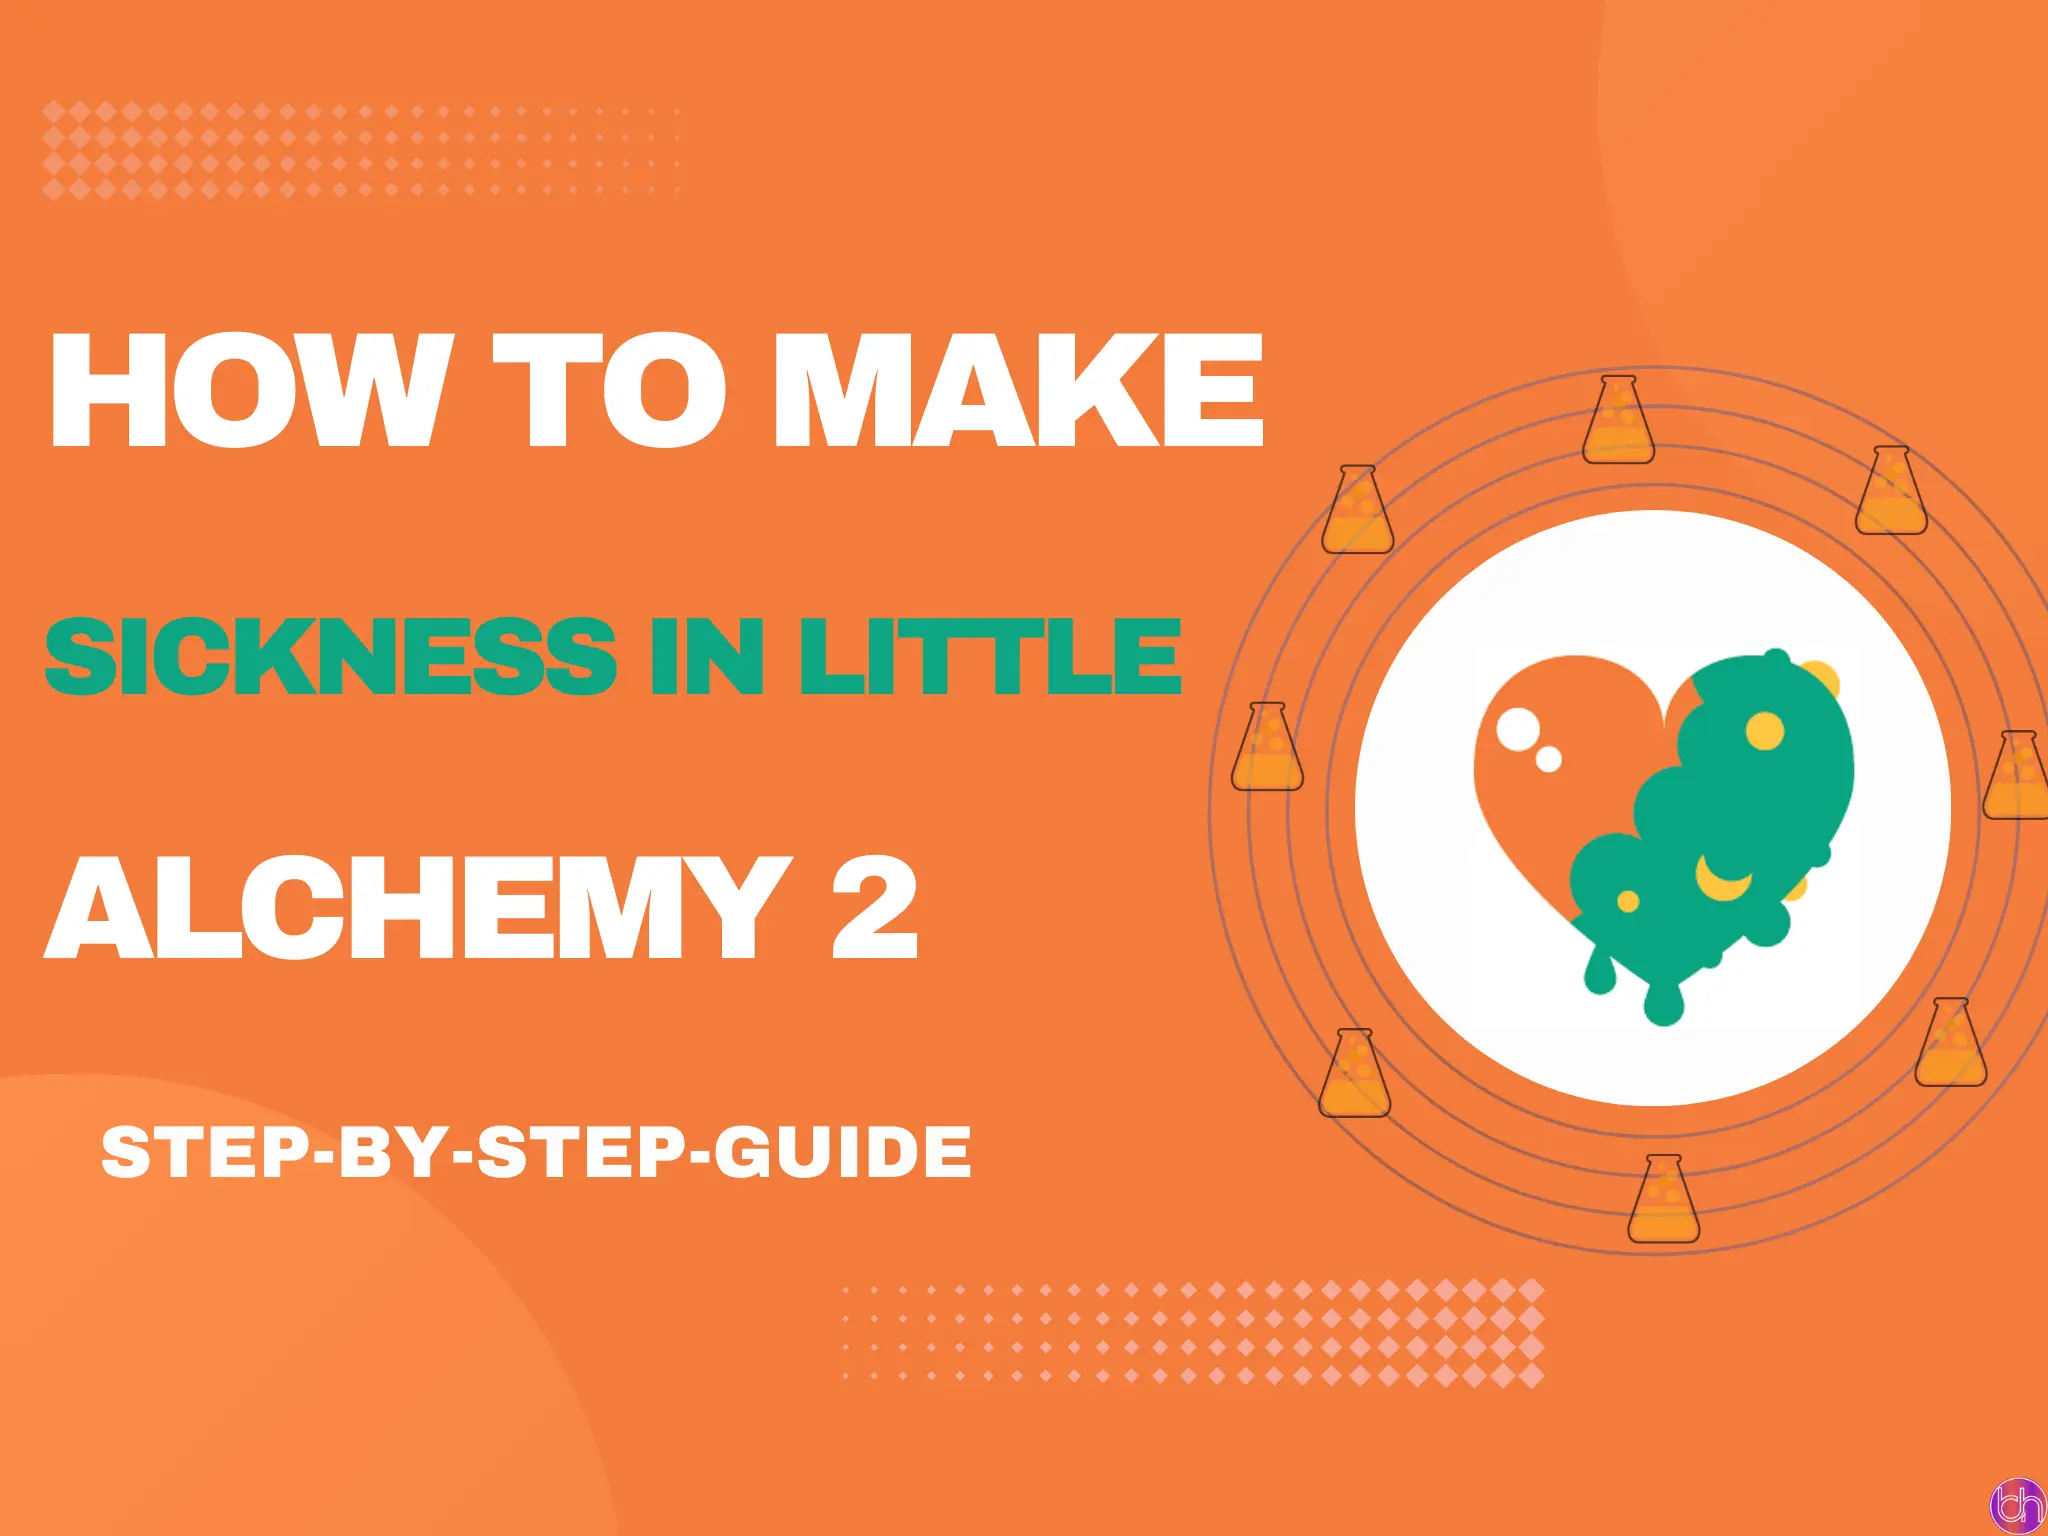 how to make sickness in little alchemy 2